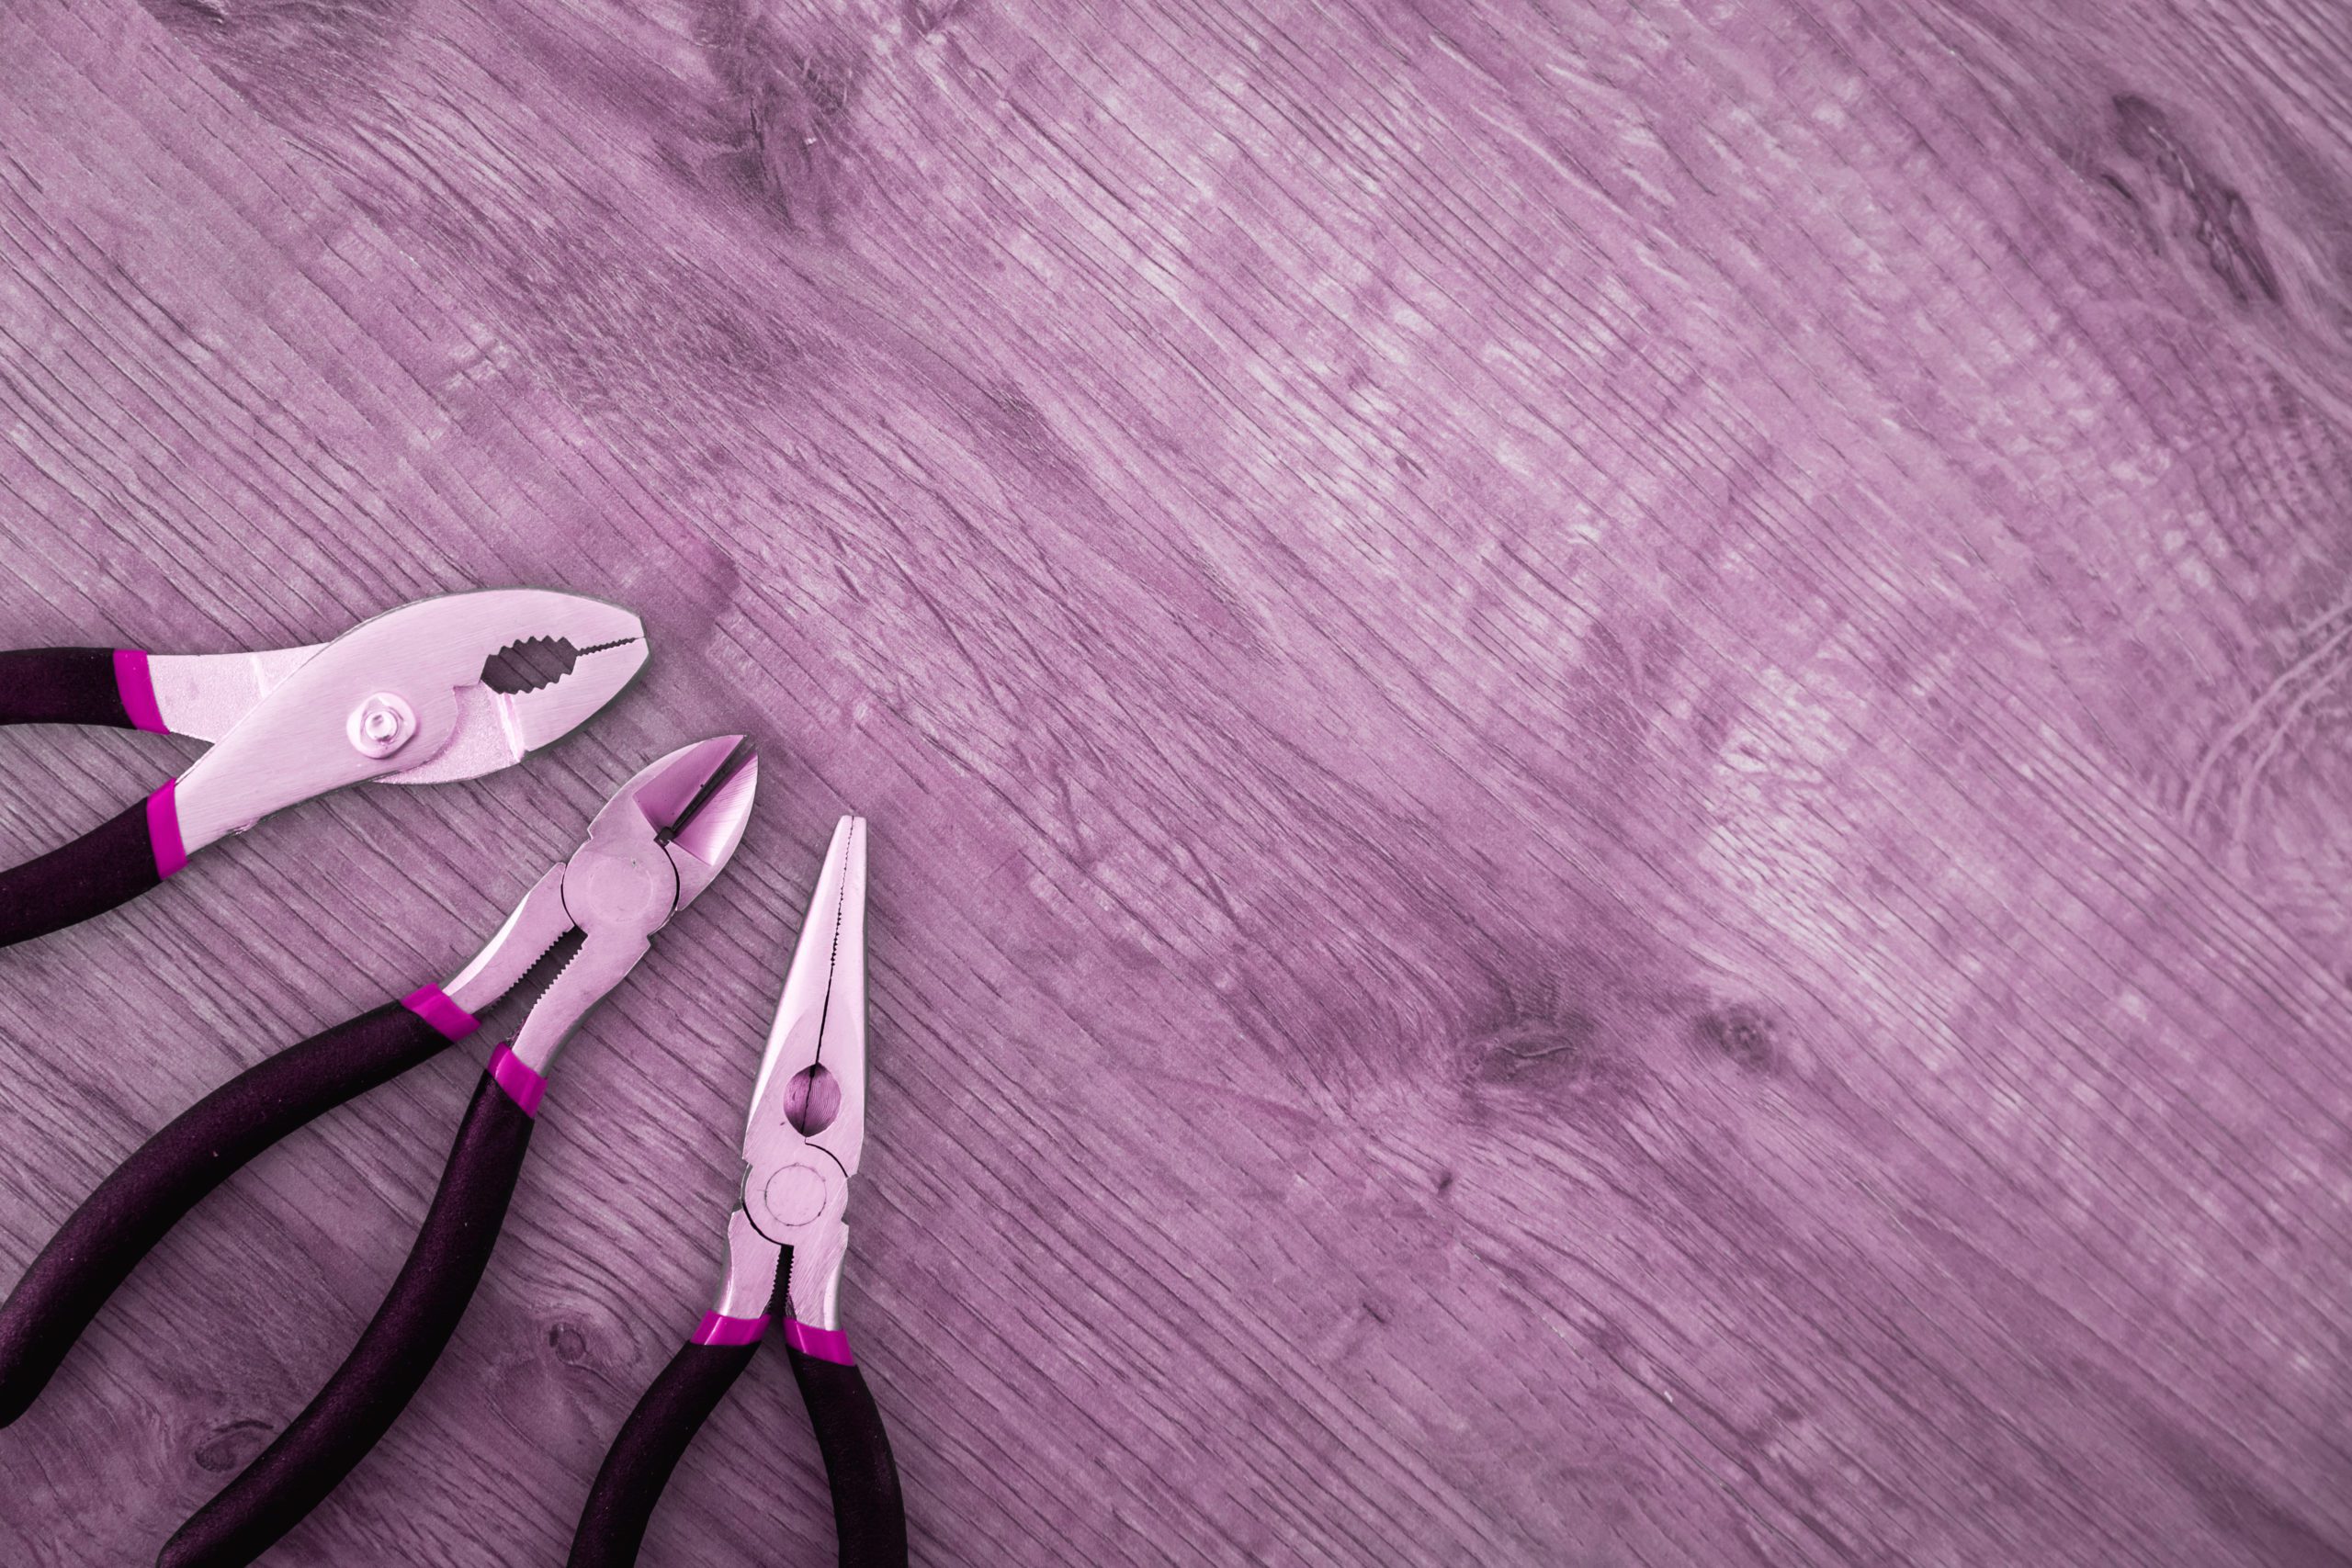 Pink filtered image with pliers etc. on a wooden floor - electrician services greater moncton